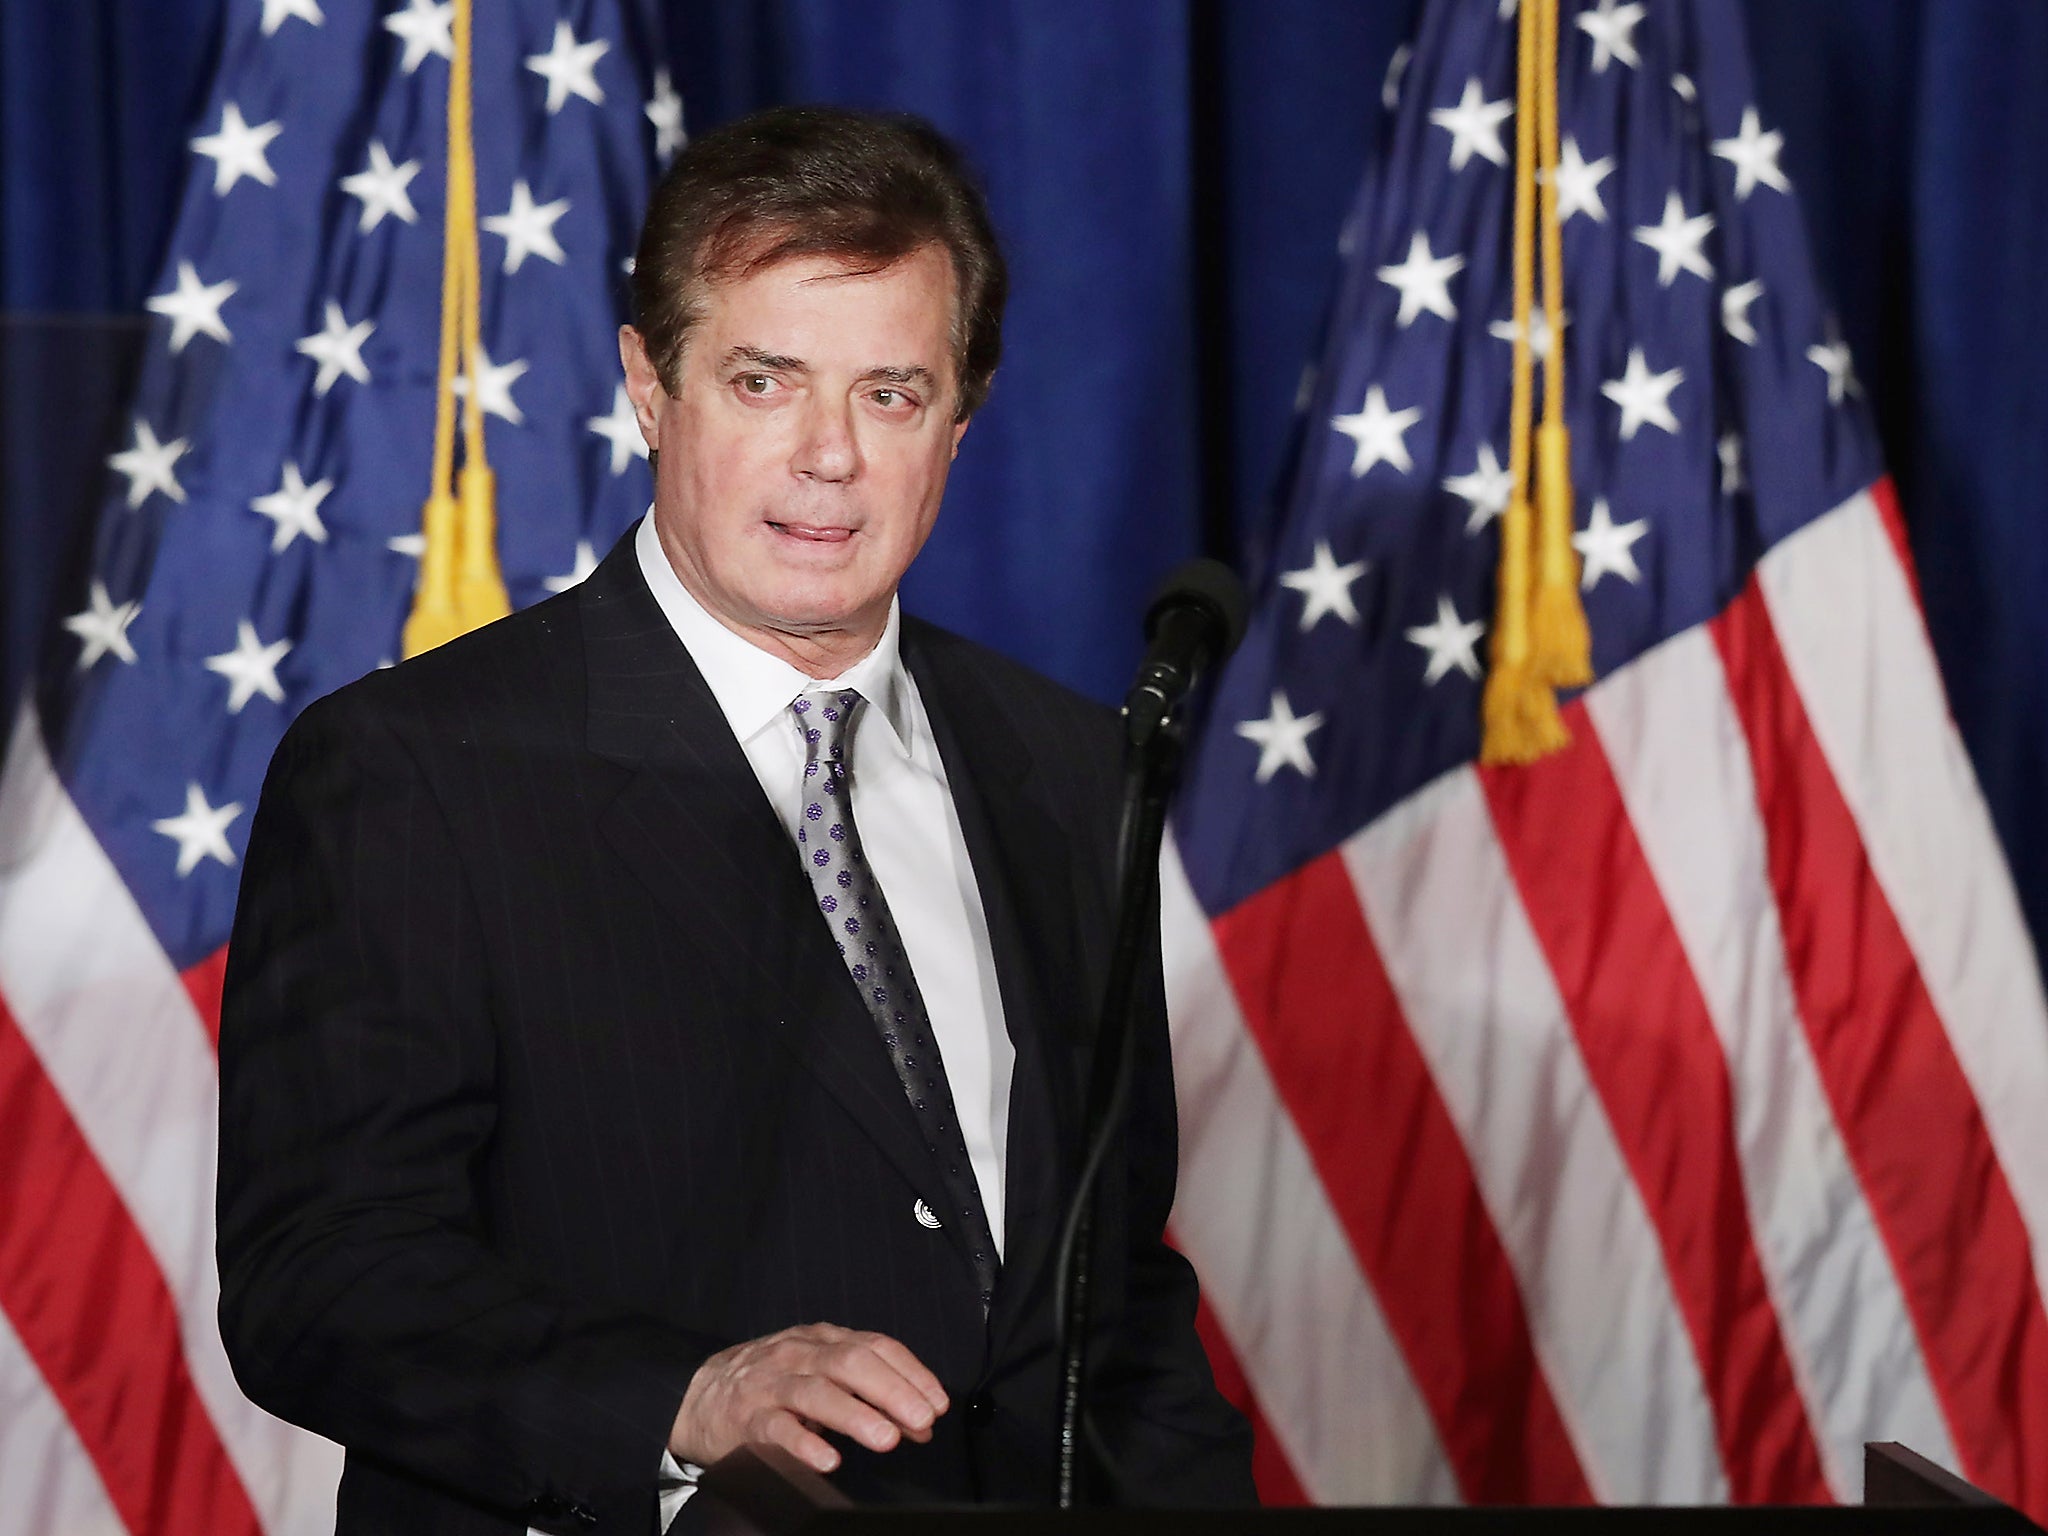 Paul Manafort was forced to resign from his position as Trump campaign manager amid revelations over business deals in Ukraine